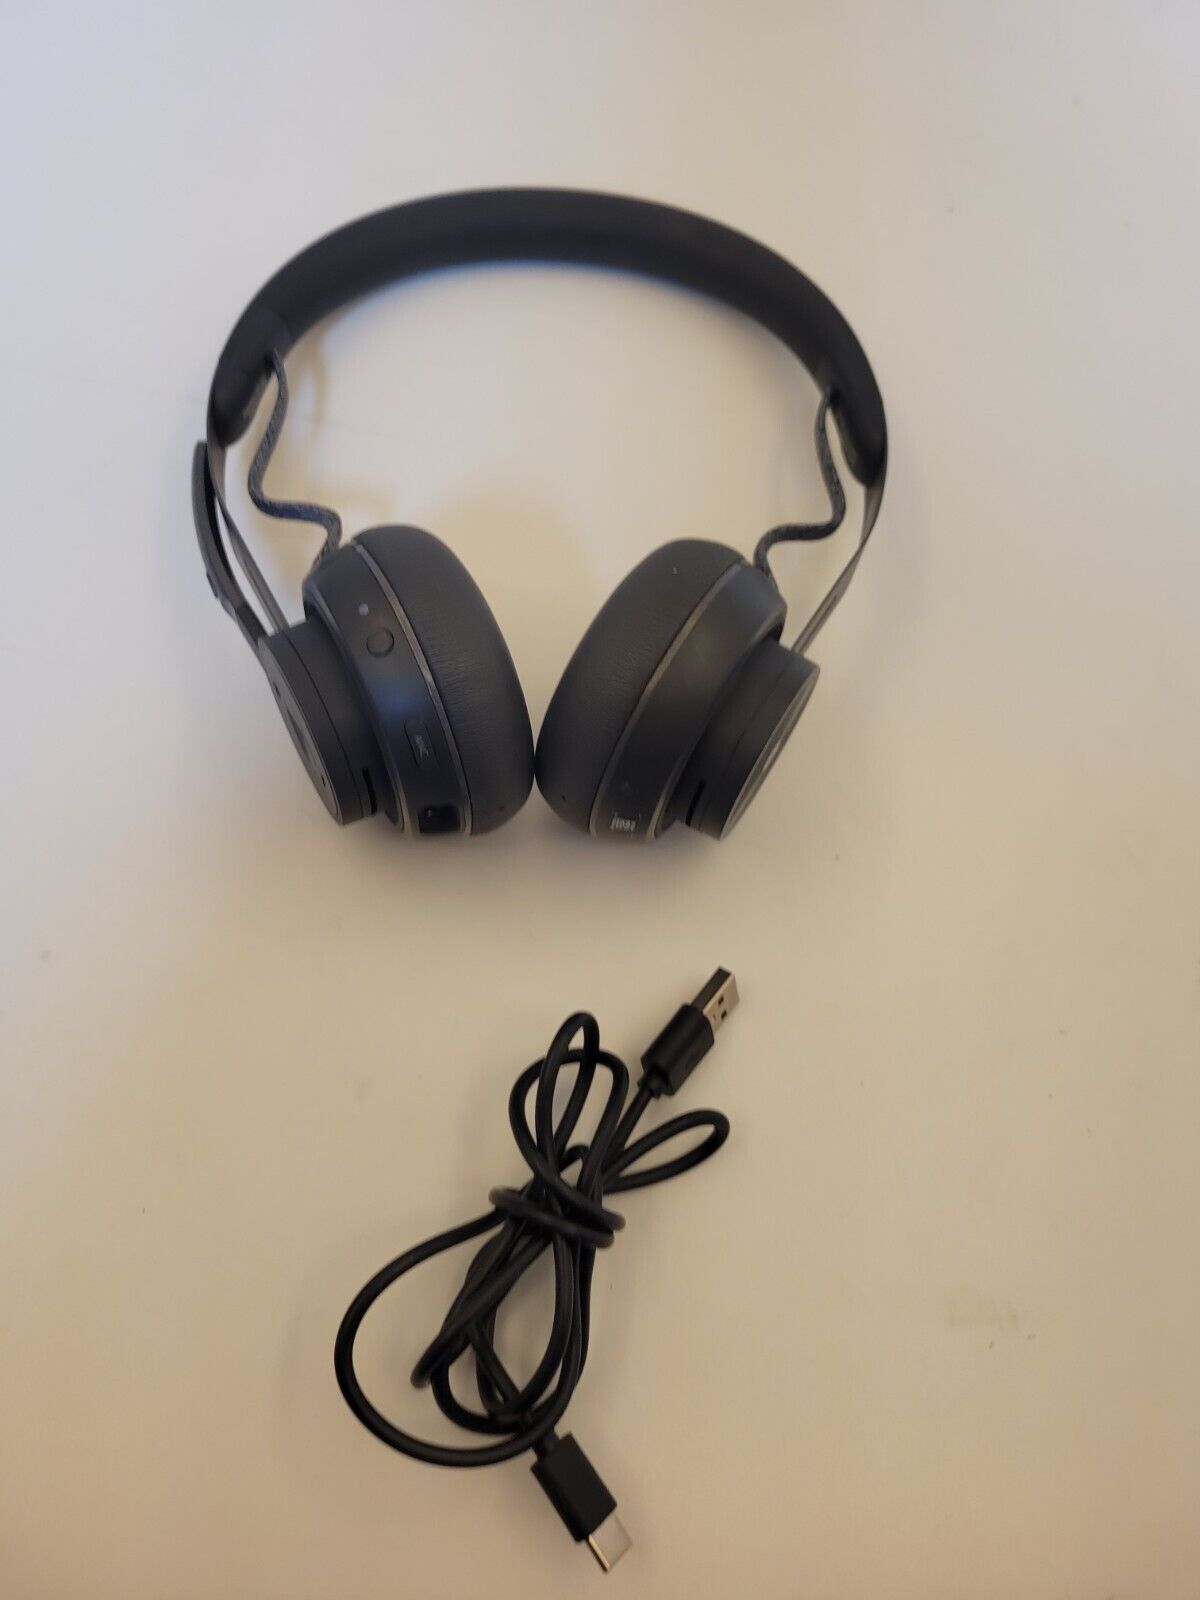 Logitech Zone 900 Wireless Headset ( Headset Only, No accessories included)